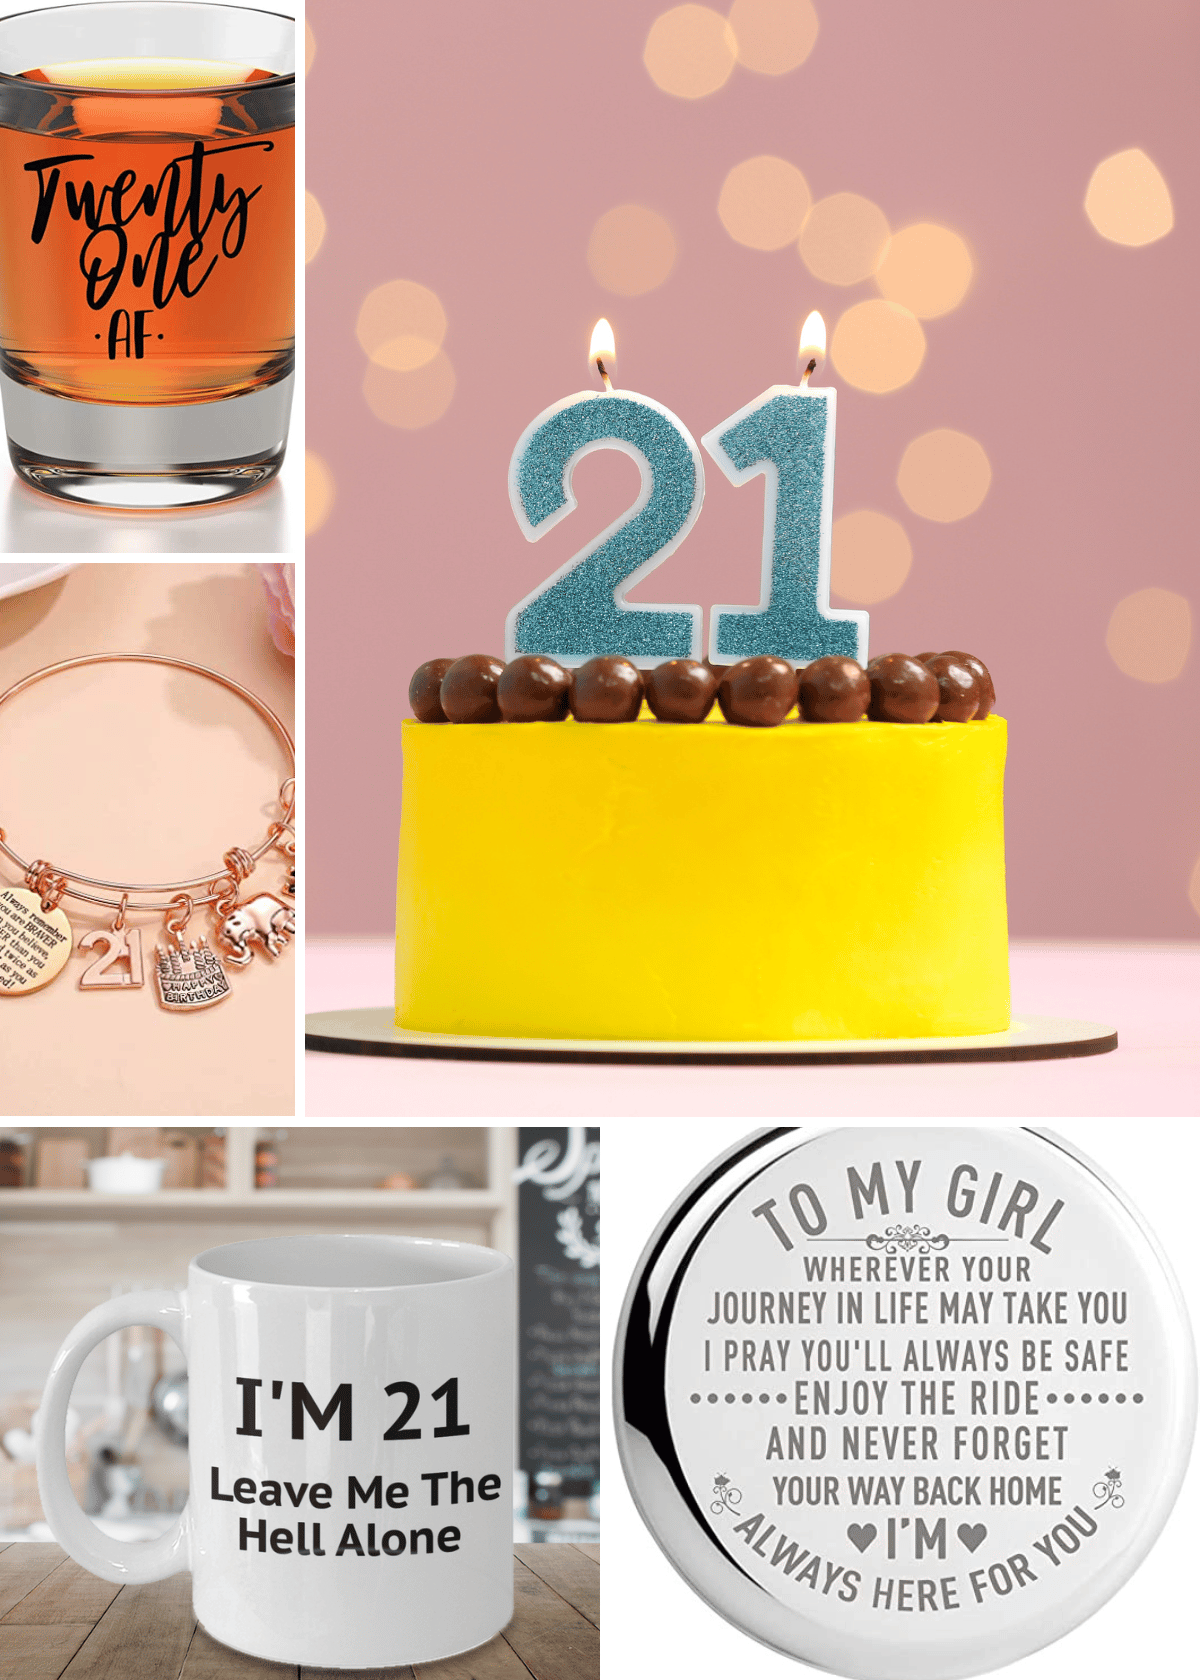 21st Birthday Gift Ideas for Your Girlfriend: Top Picks on Amazon